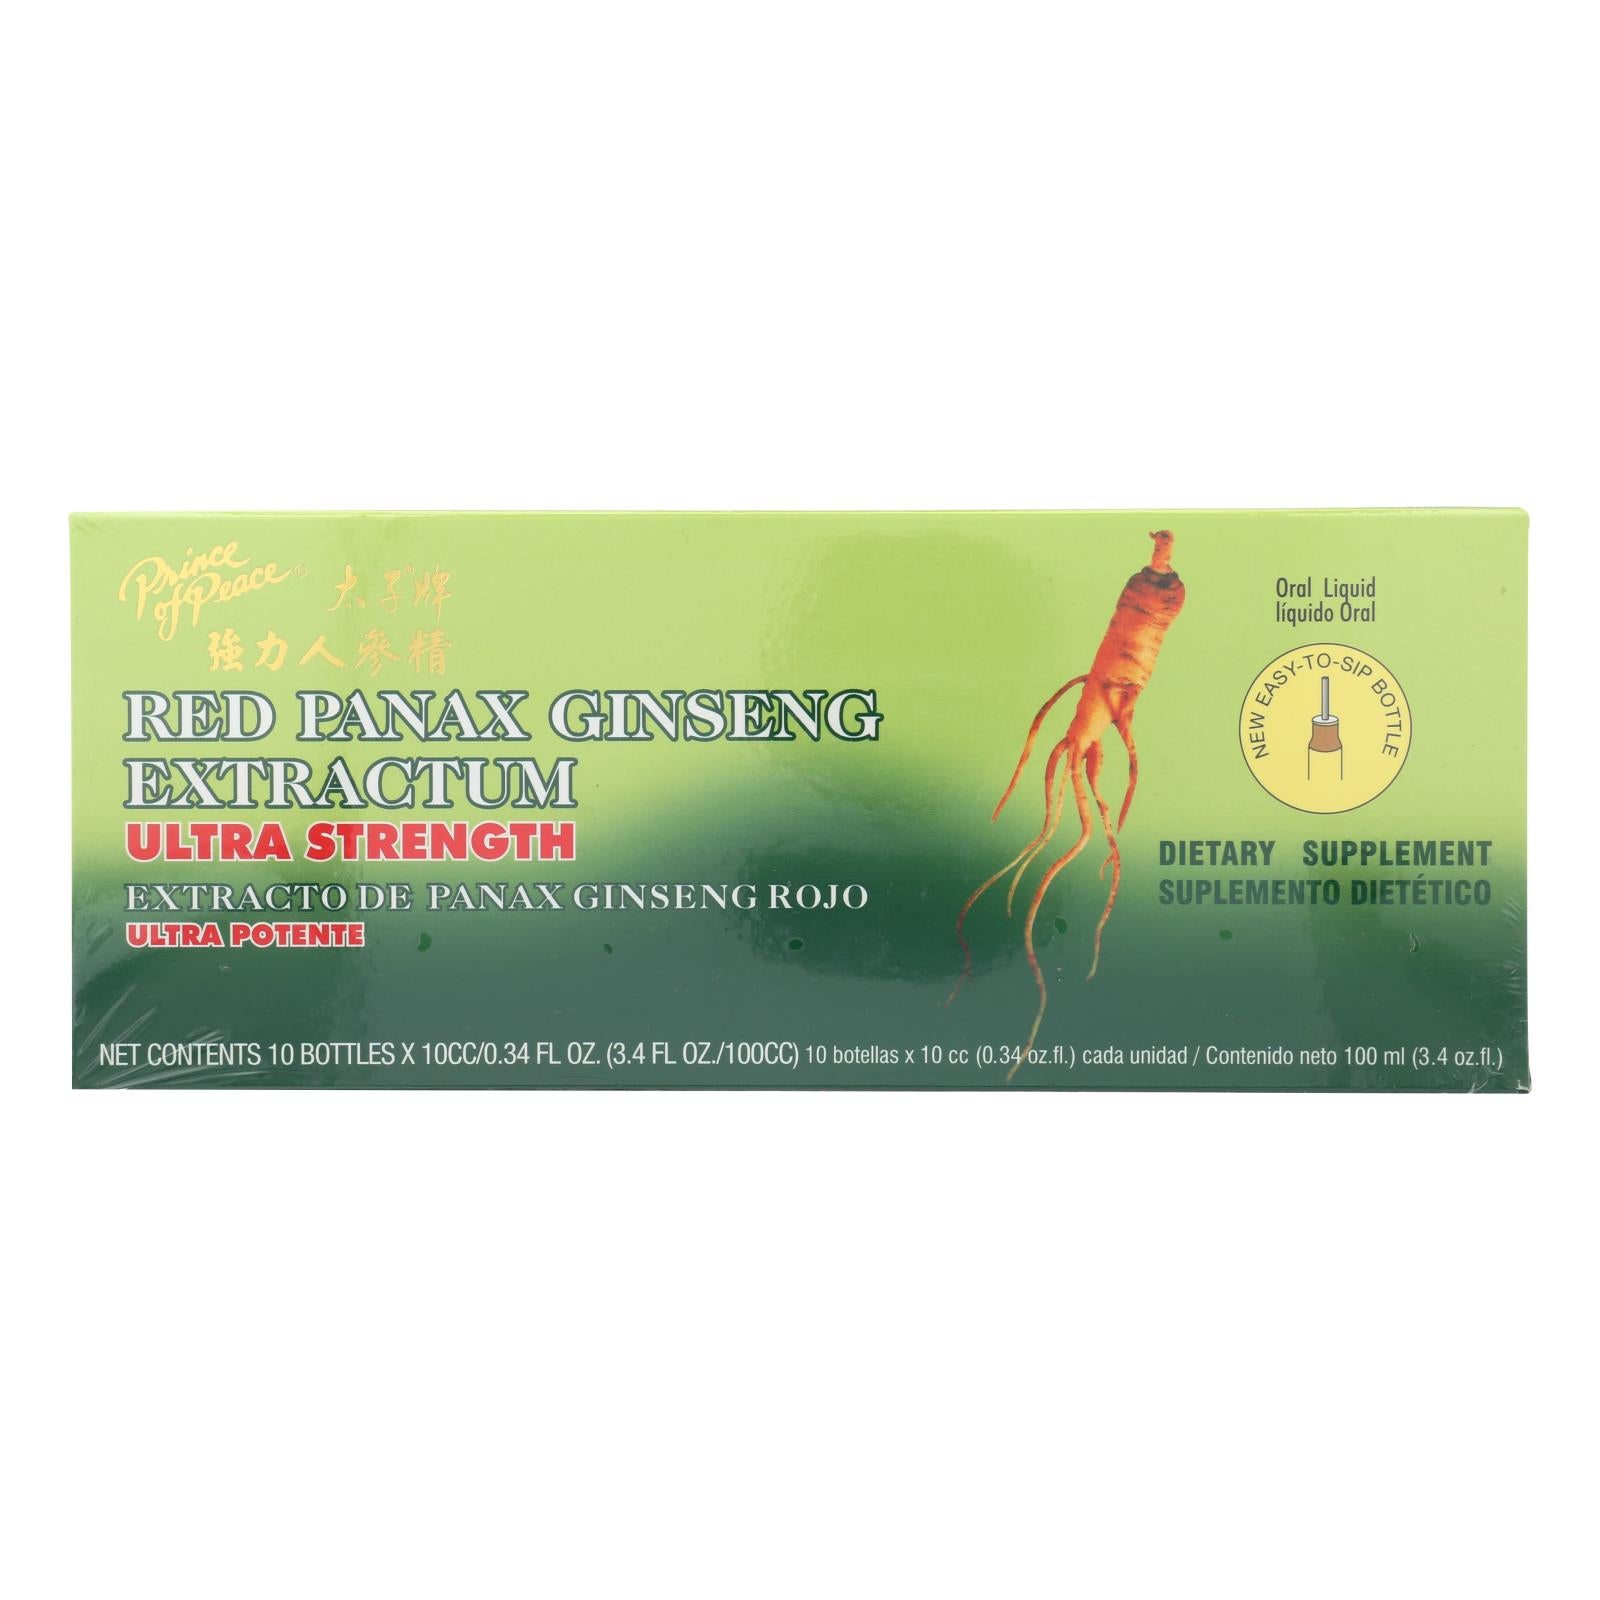 Prince Of Peace Red Panax Ginseng Extractum Ultra Strength - 10 Vials